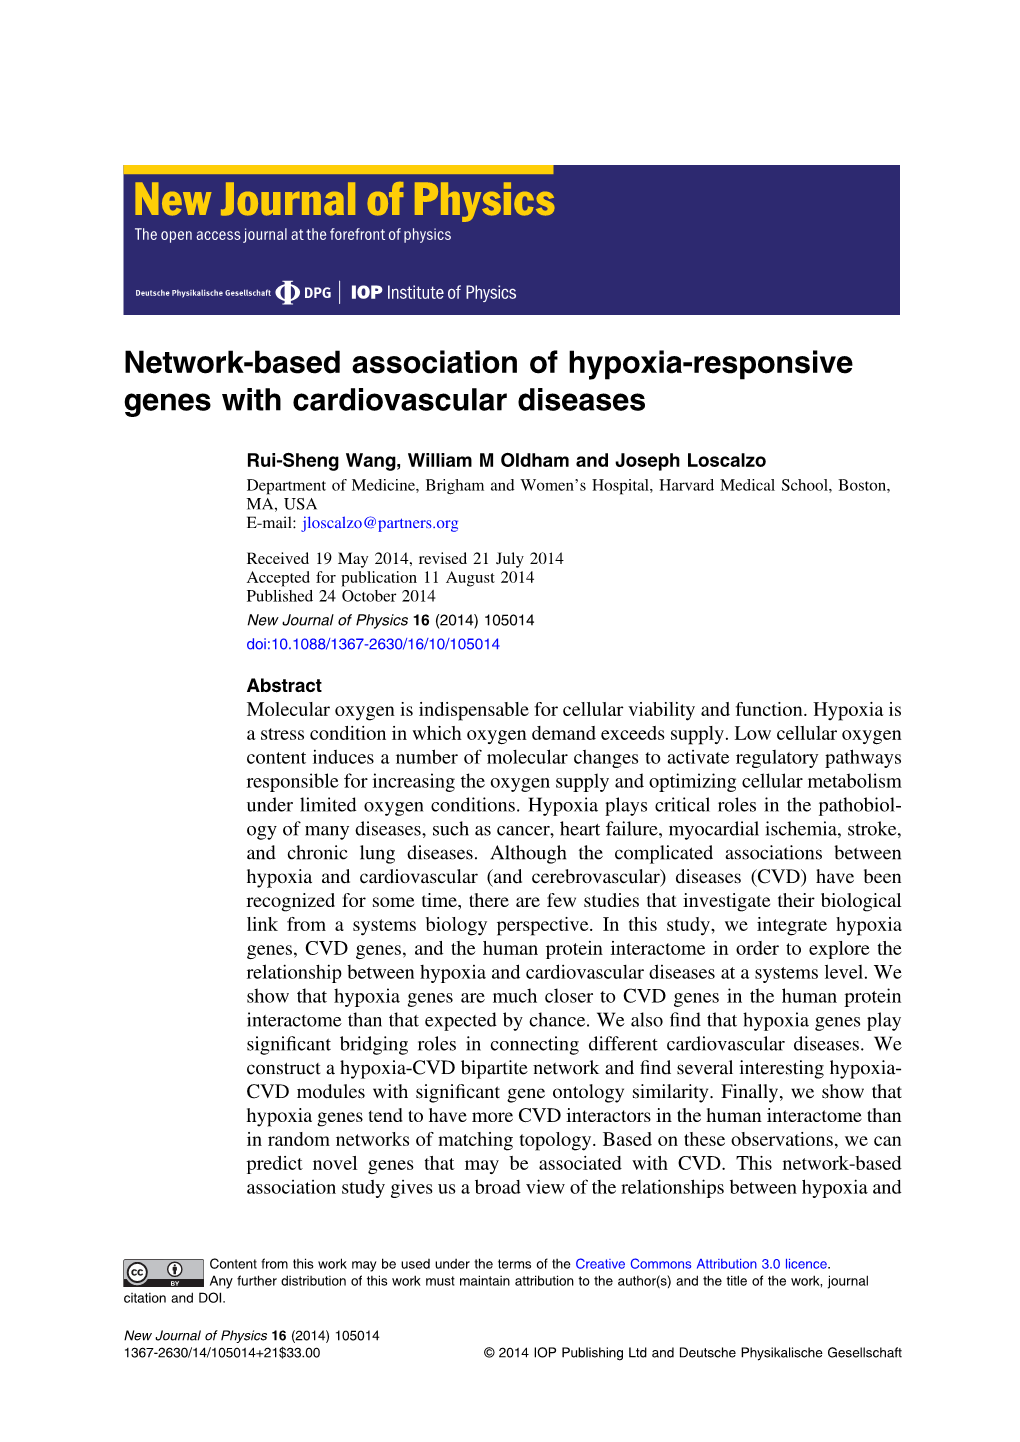 Network-Based Association of Hypoxia-Responsive Genes with Cardiovascular Diseases